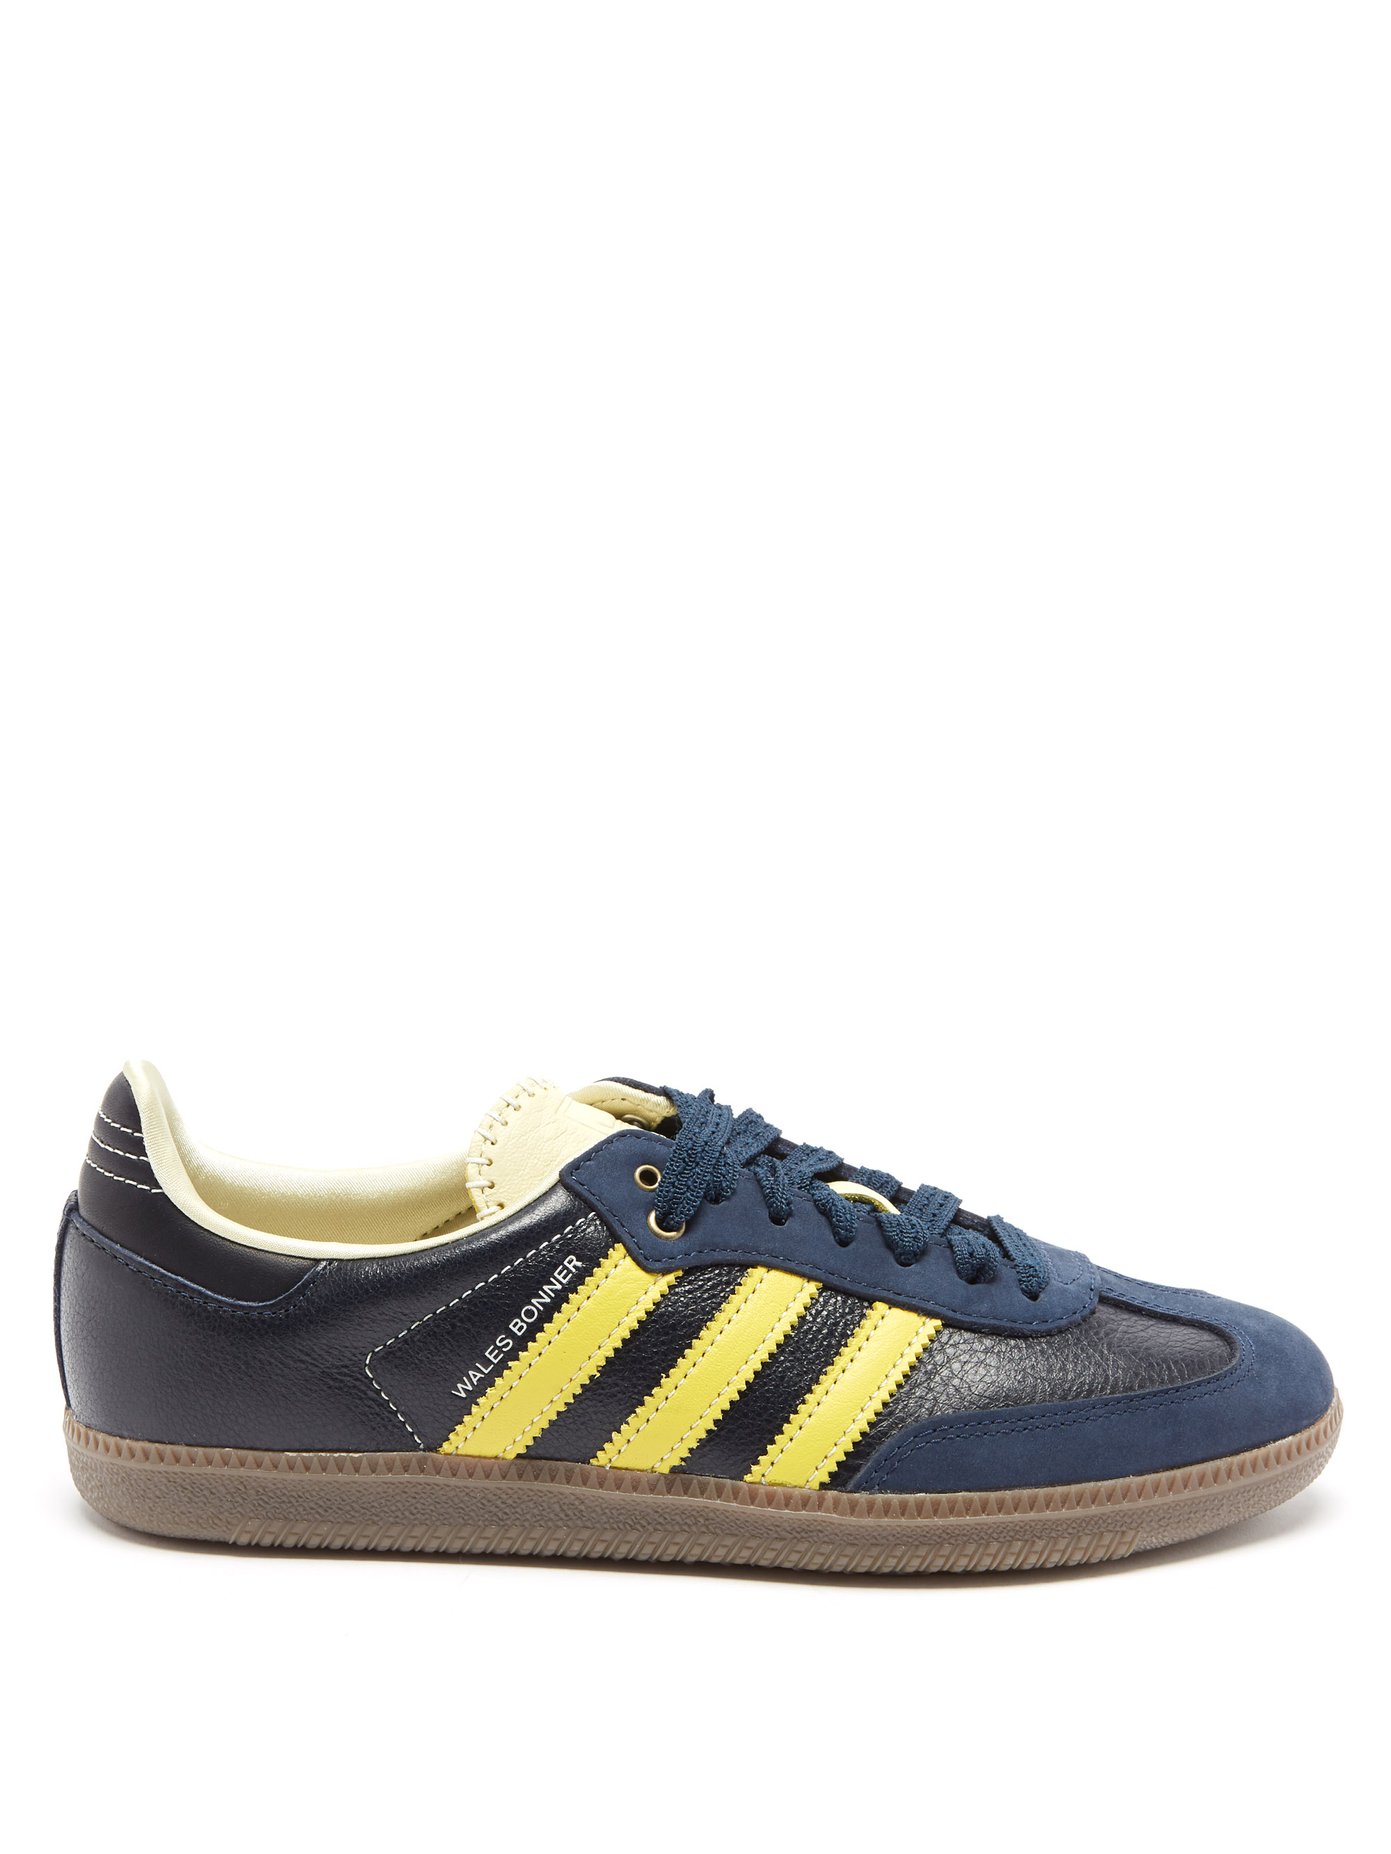 adidas gold stripe trainers